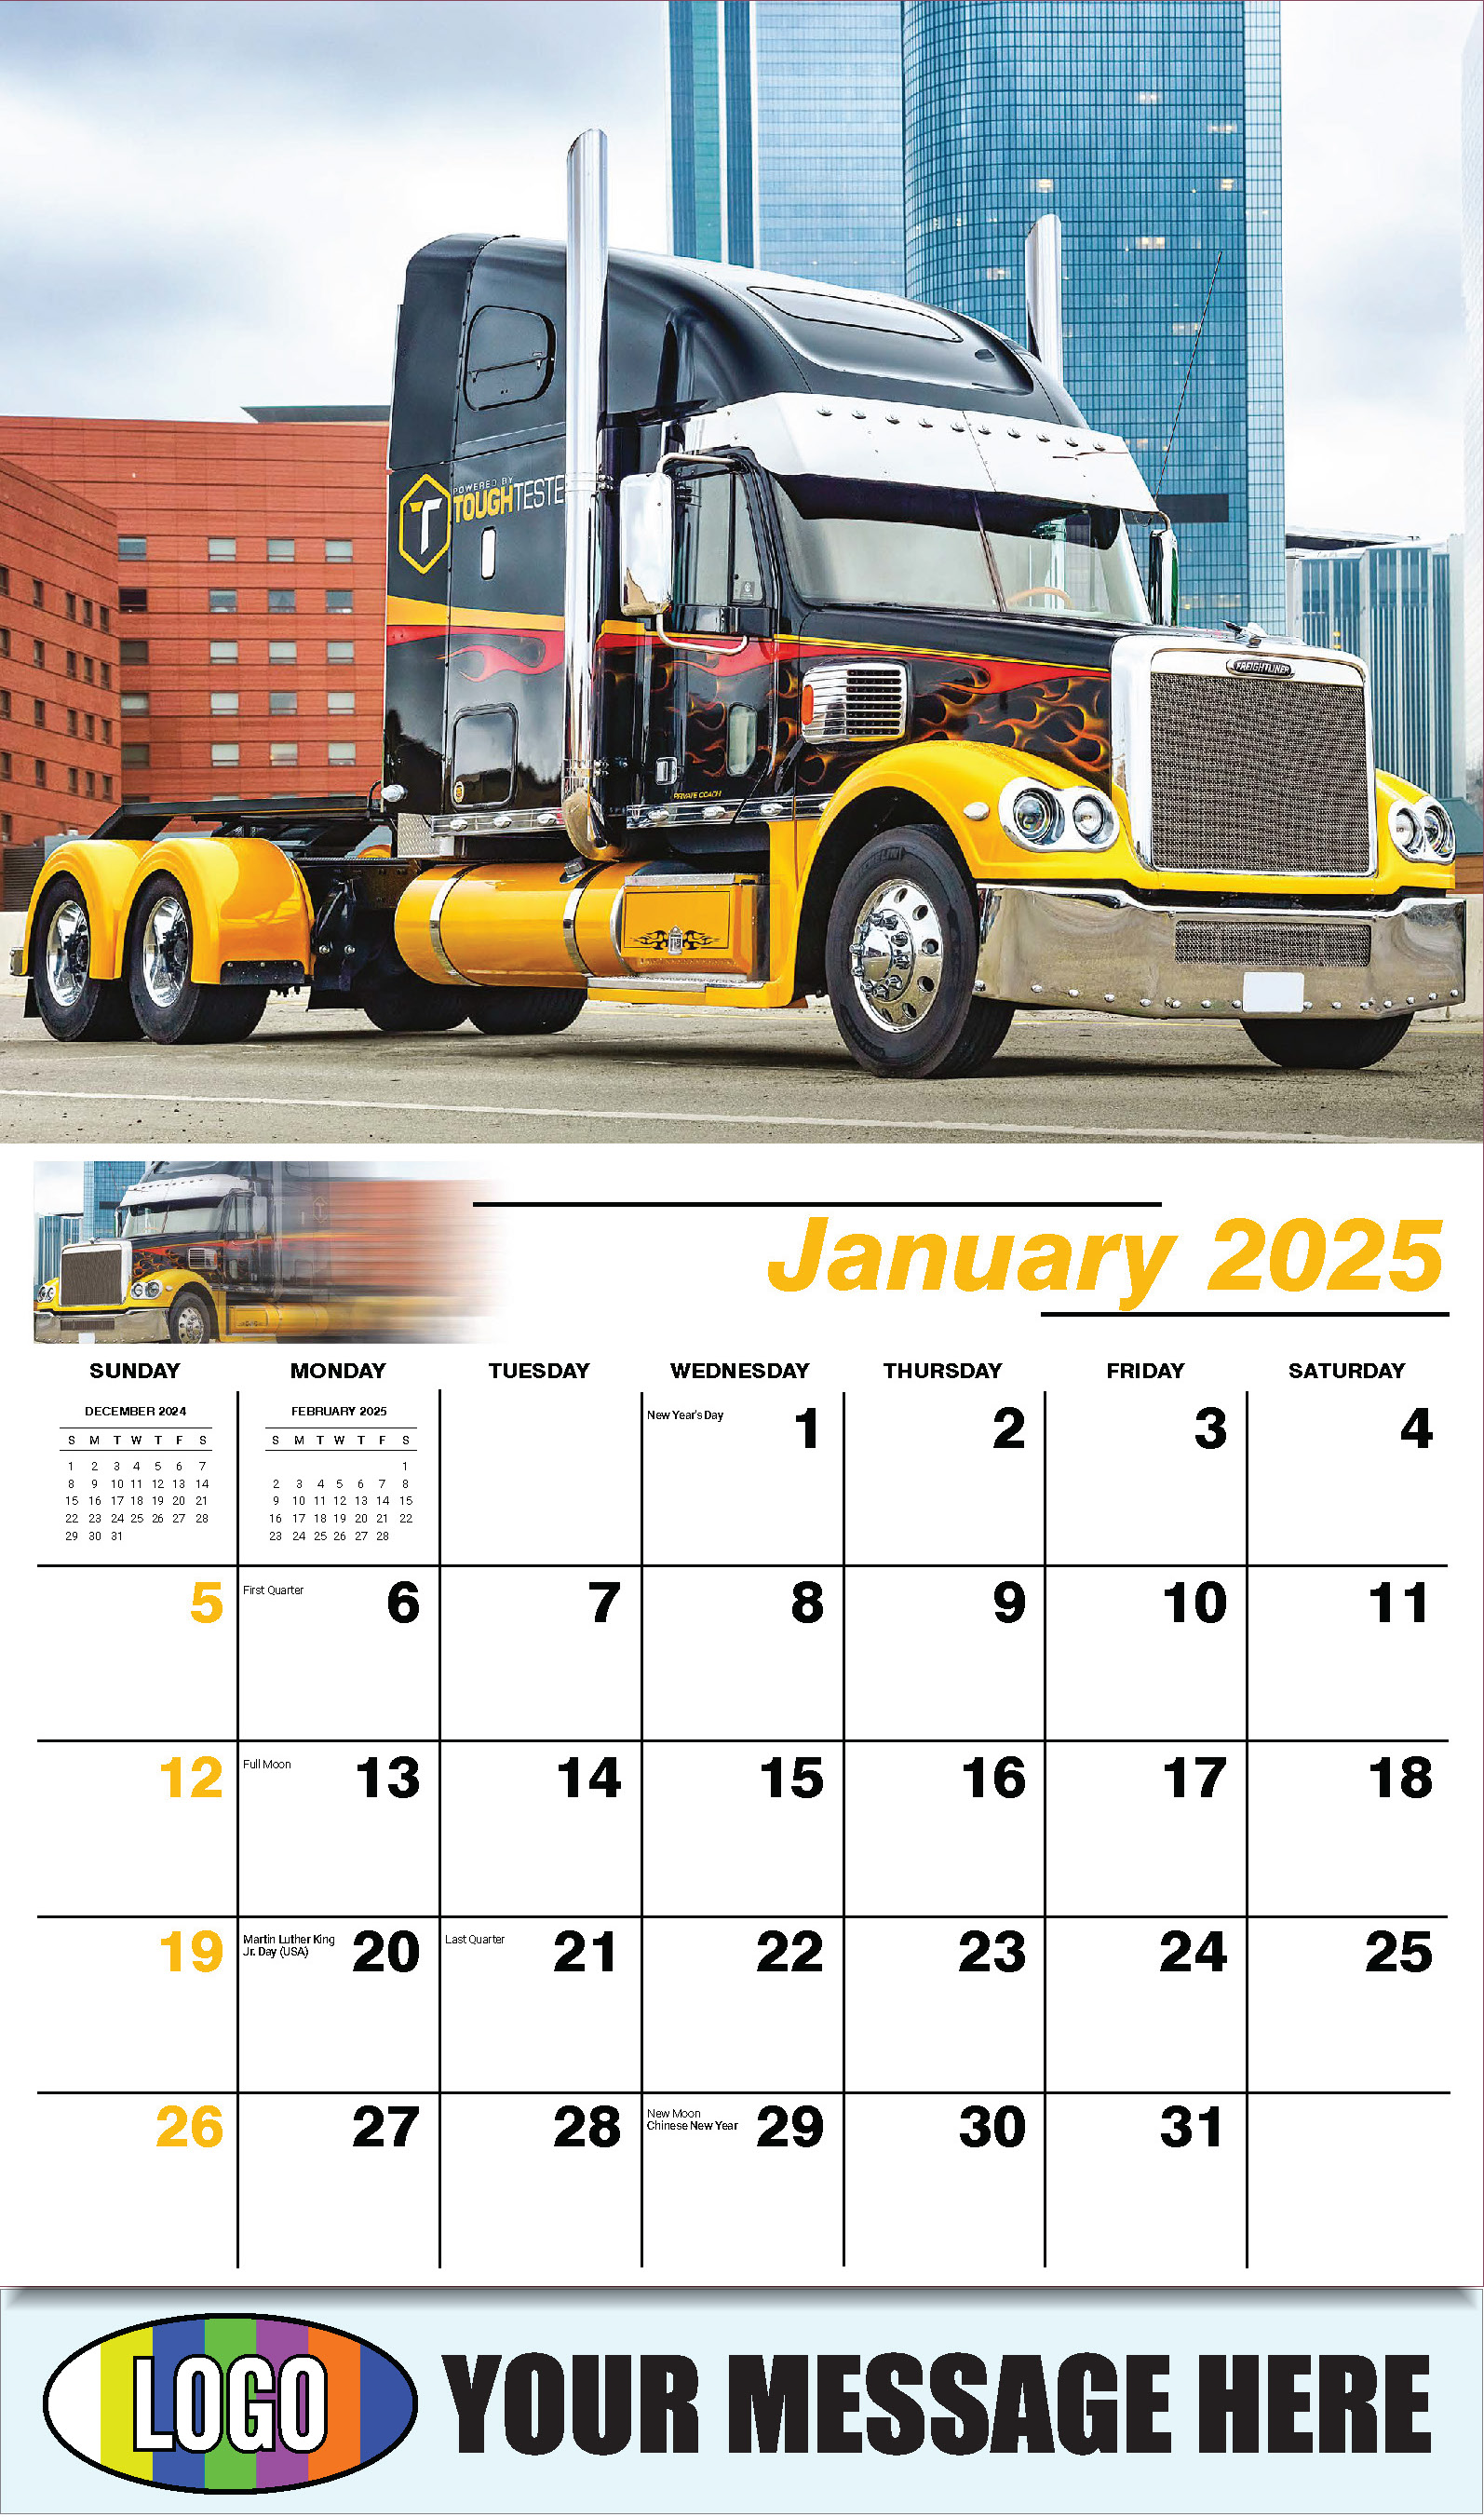 Kings of the Road 2025 Automotive Business Promotional Calendar - January